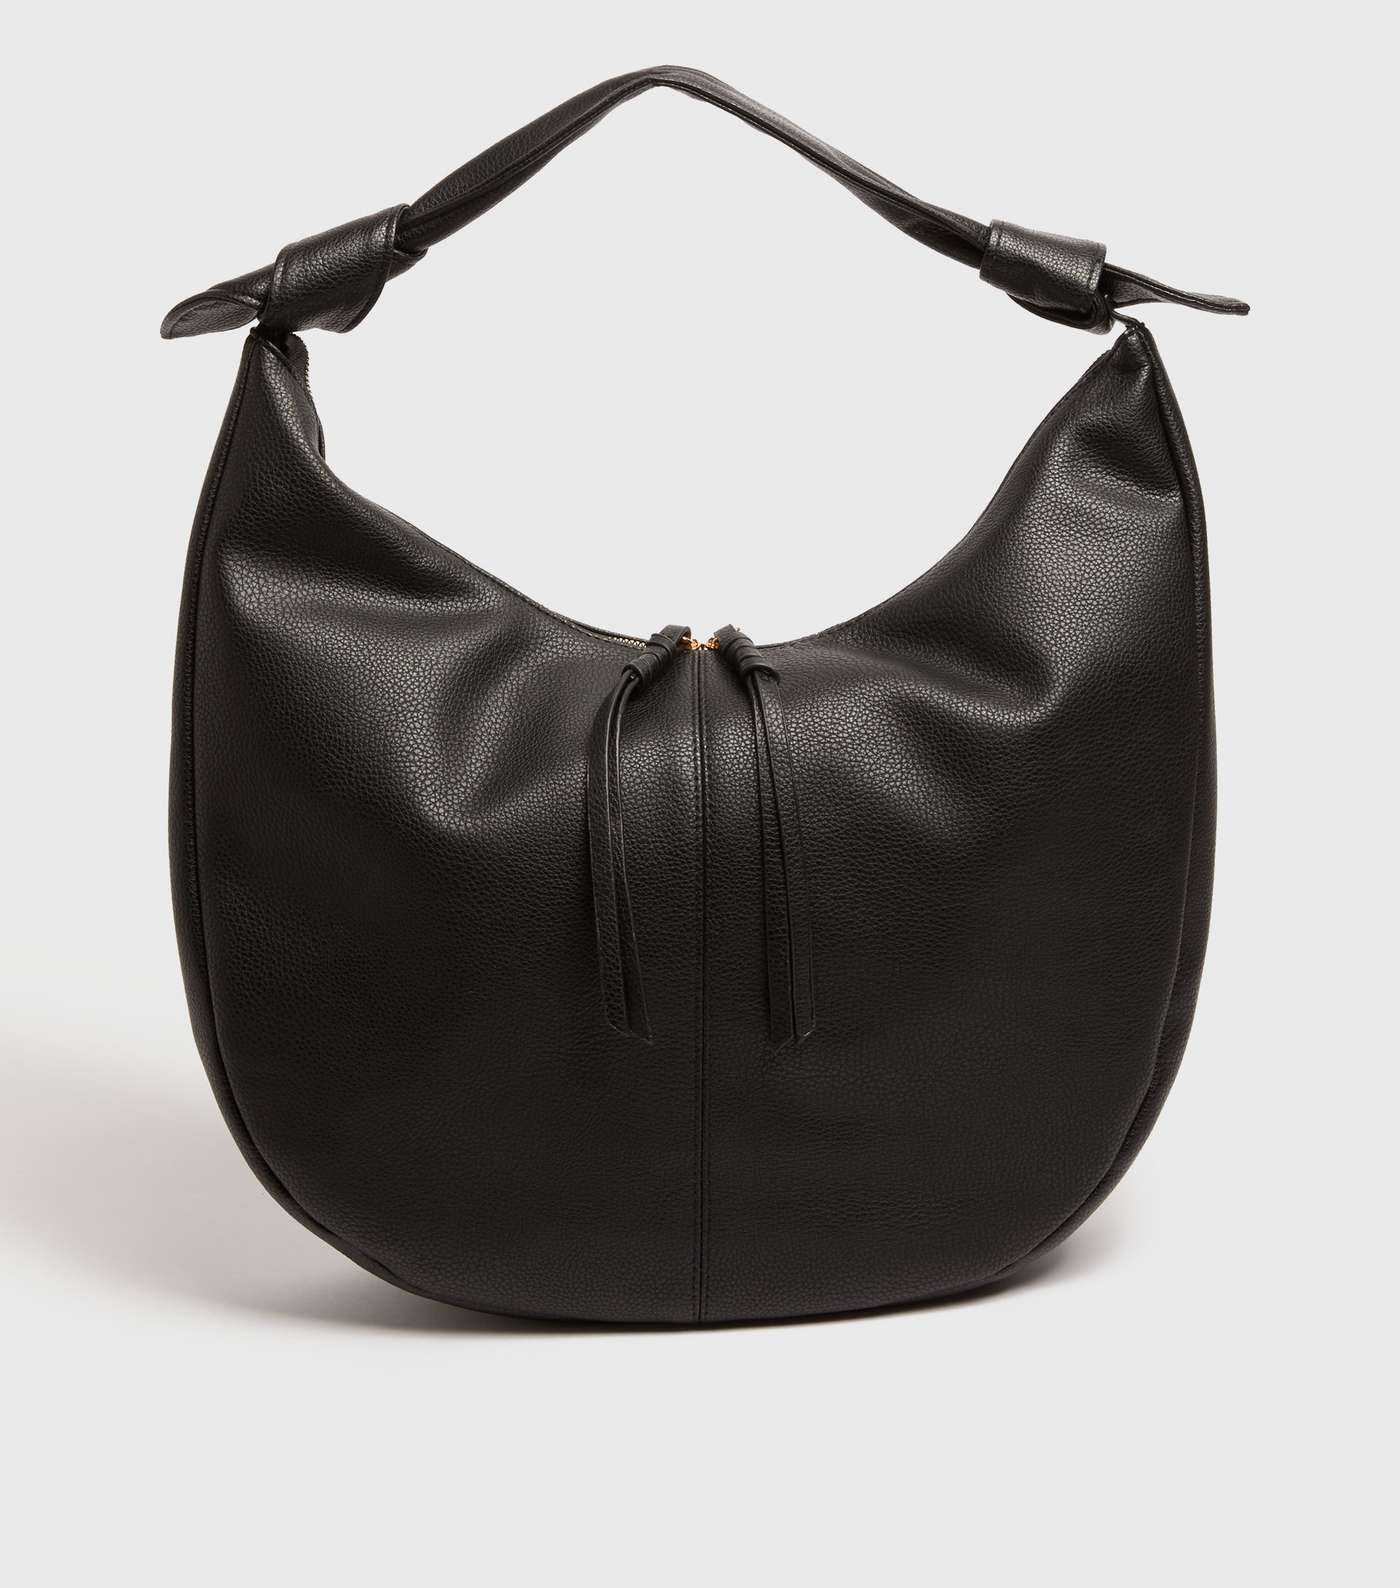 Black Leather-Look Slouchy Tote Bag